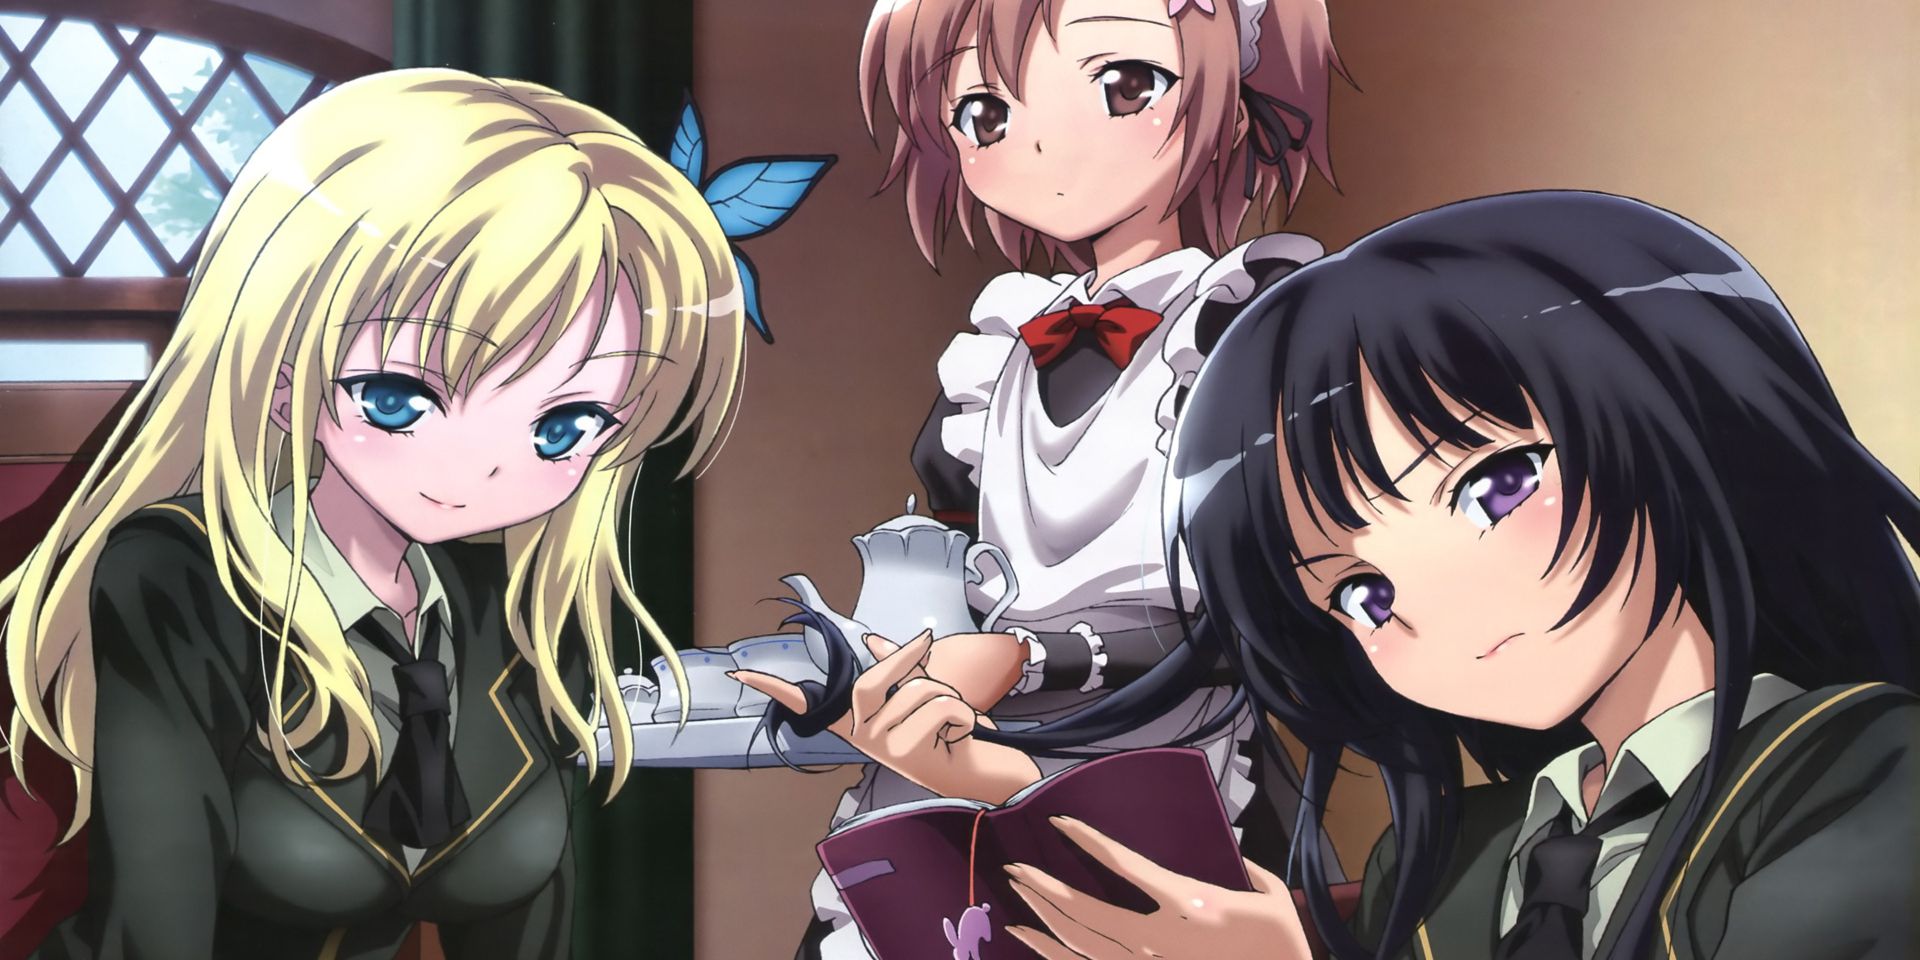 Characters from the anime series Haganai: I Don't Have Many Friends.